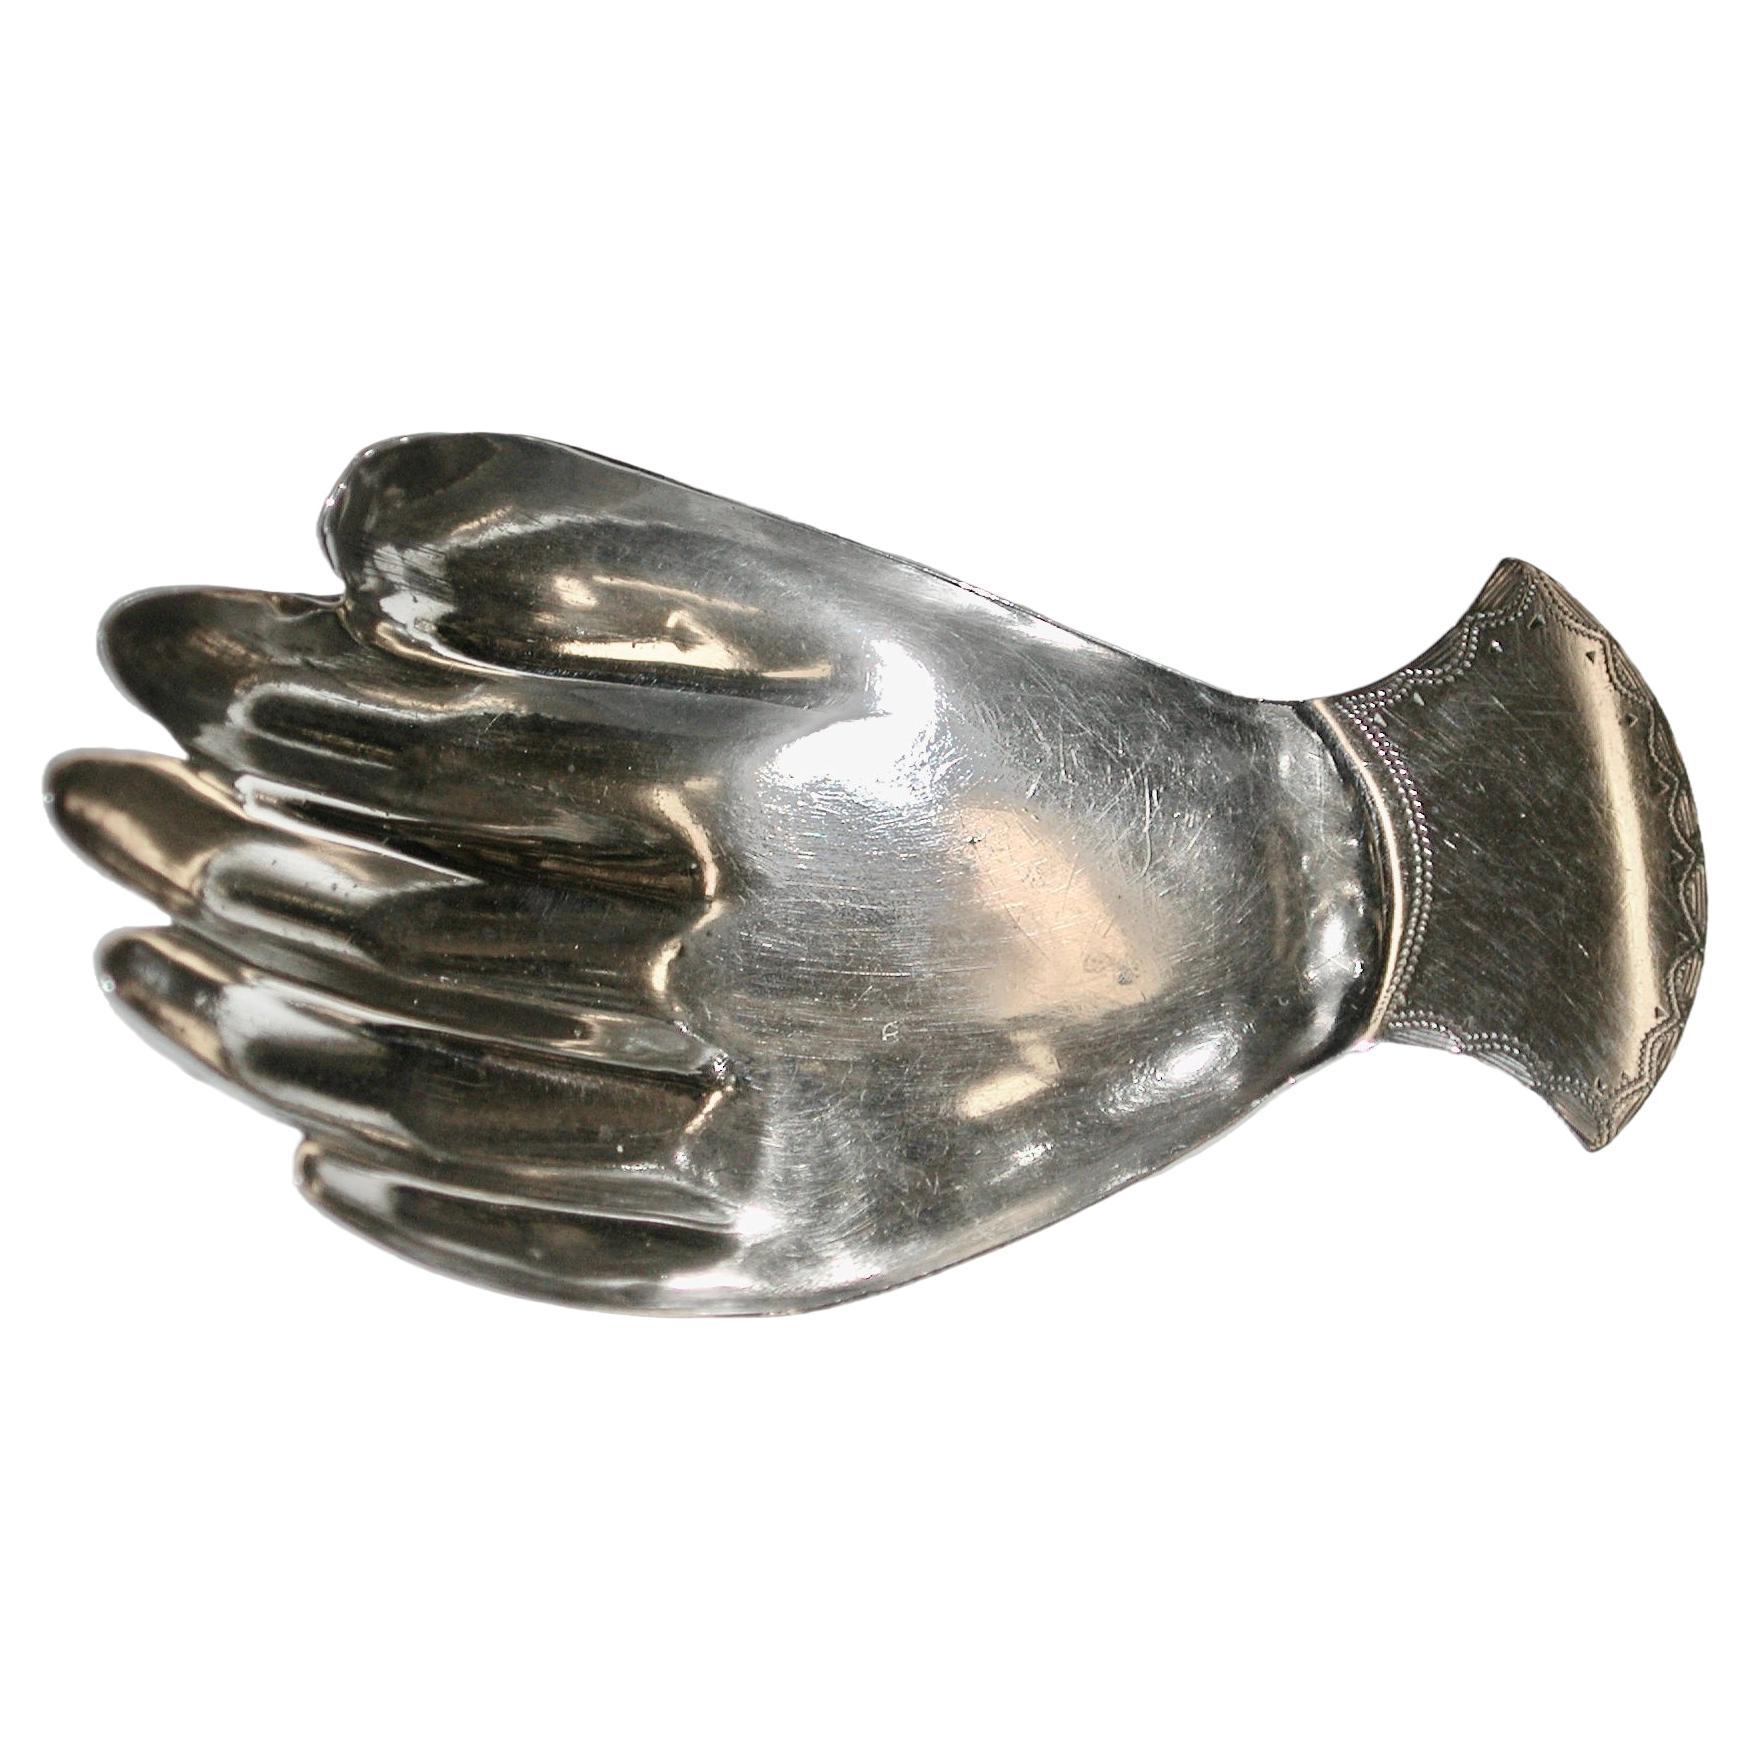 George 111 Silver Hand Caddy Spoon London by Josiah Snatt dated  1812
A rare George III silver Caddy Spoon, made in the form of a right hand, the cuff shaped handle with bright-cut engraved decoration.

